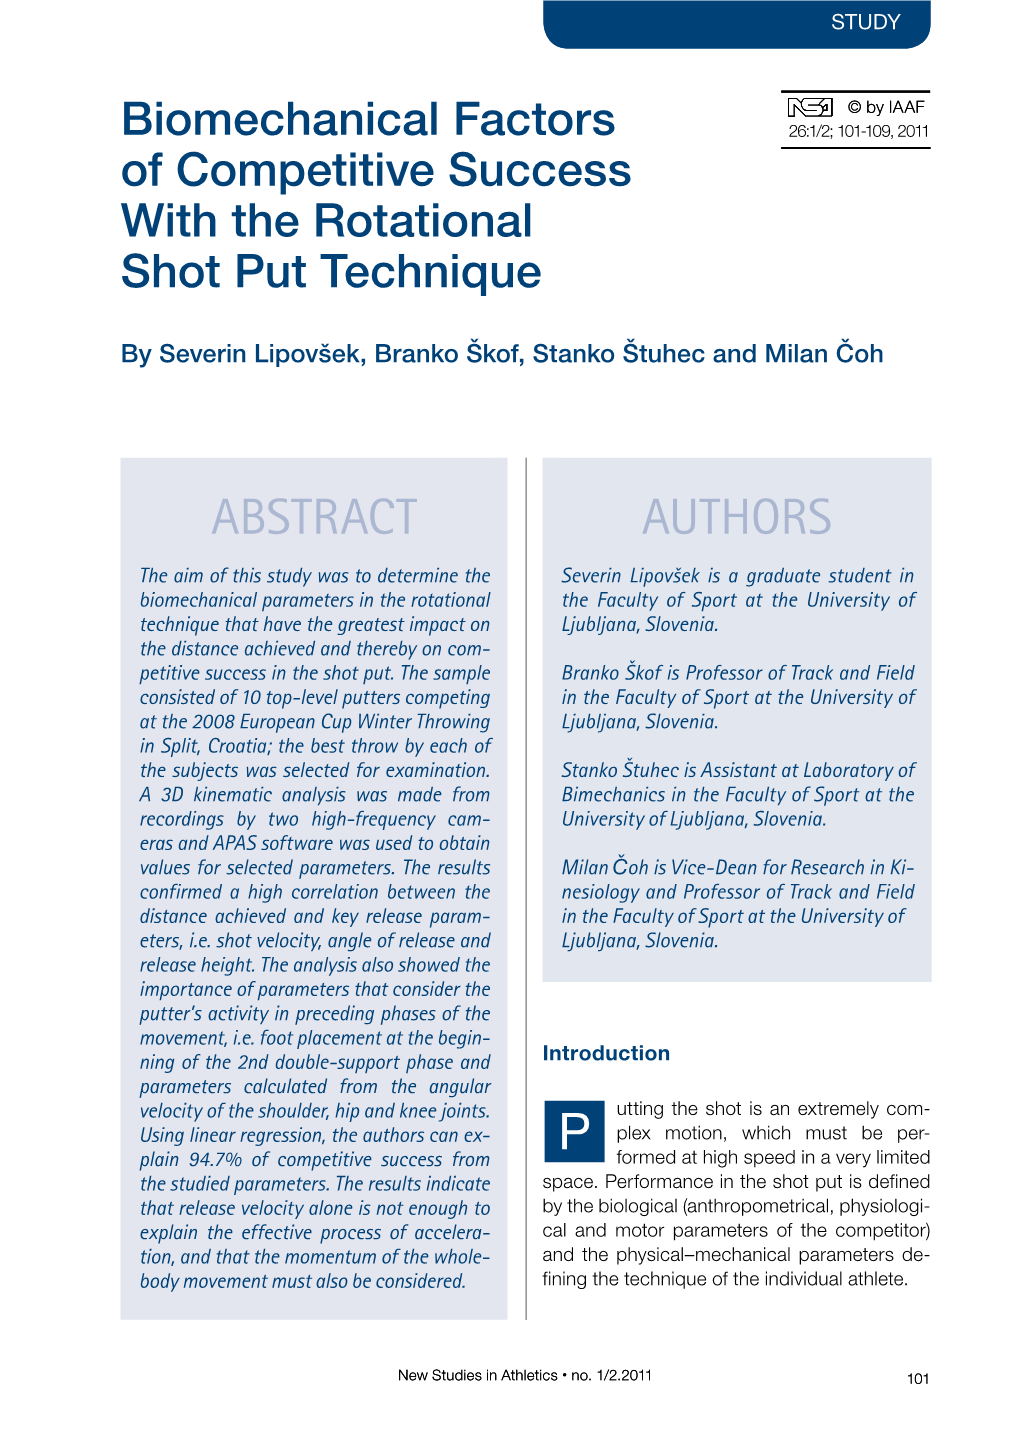 Biomechanical Factors of Competitive Success with the Rotational Shot Put Technique